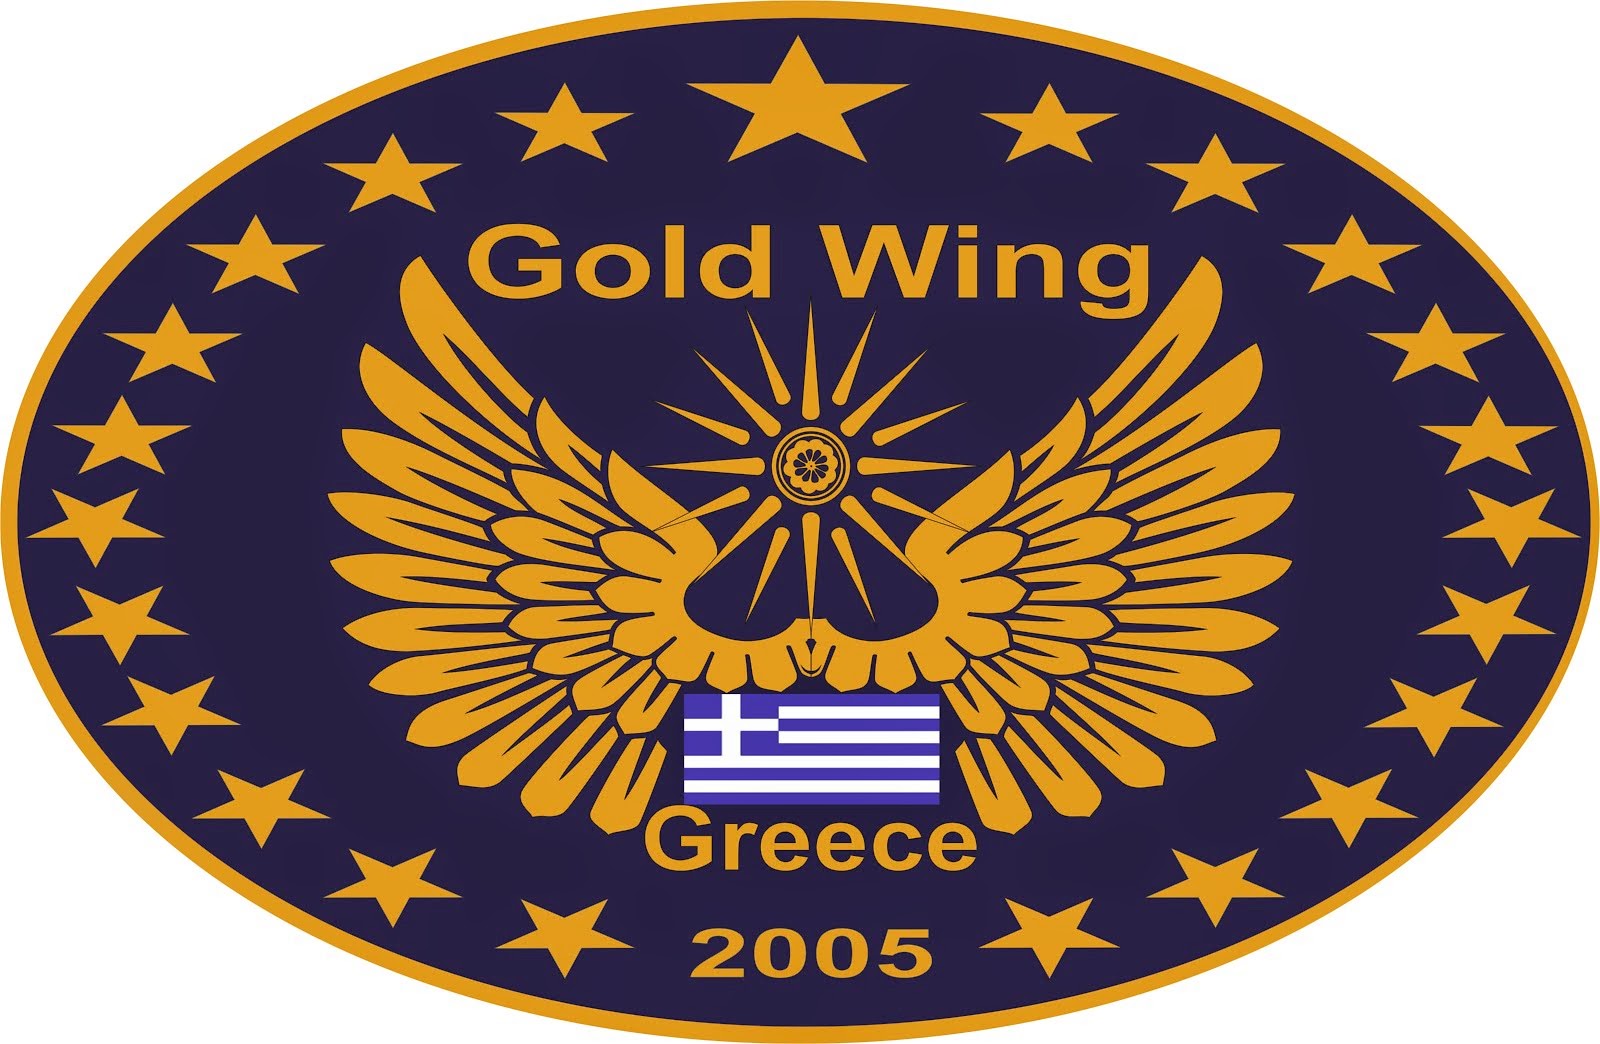 Kings Riders - Gold Wing Greece